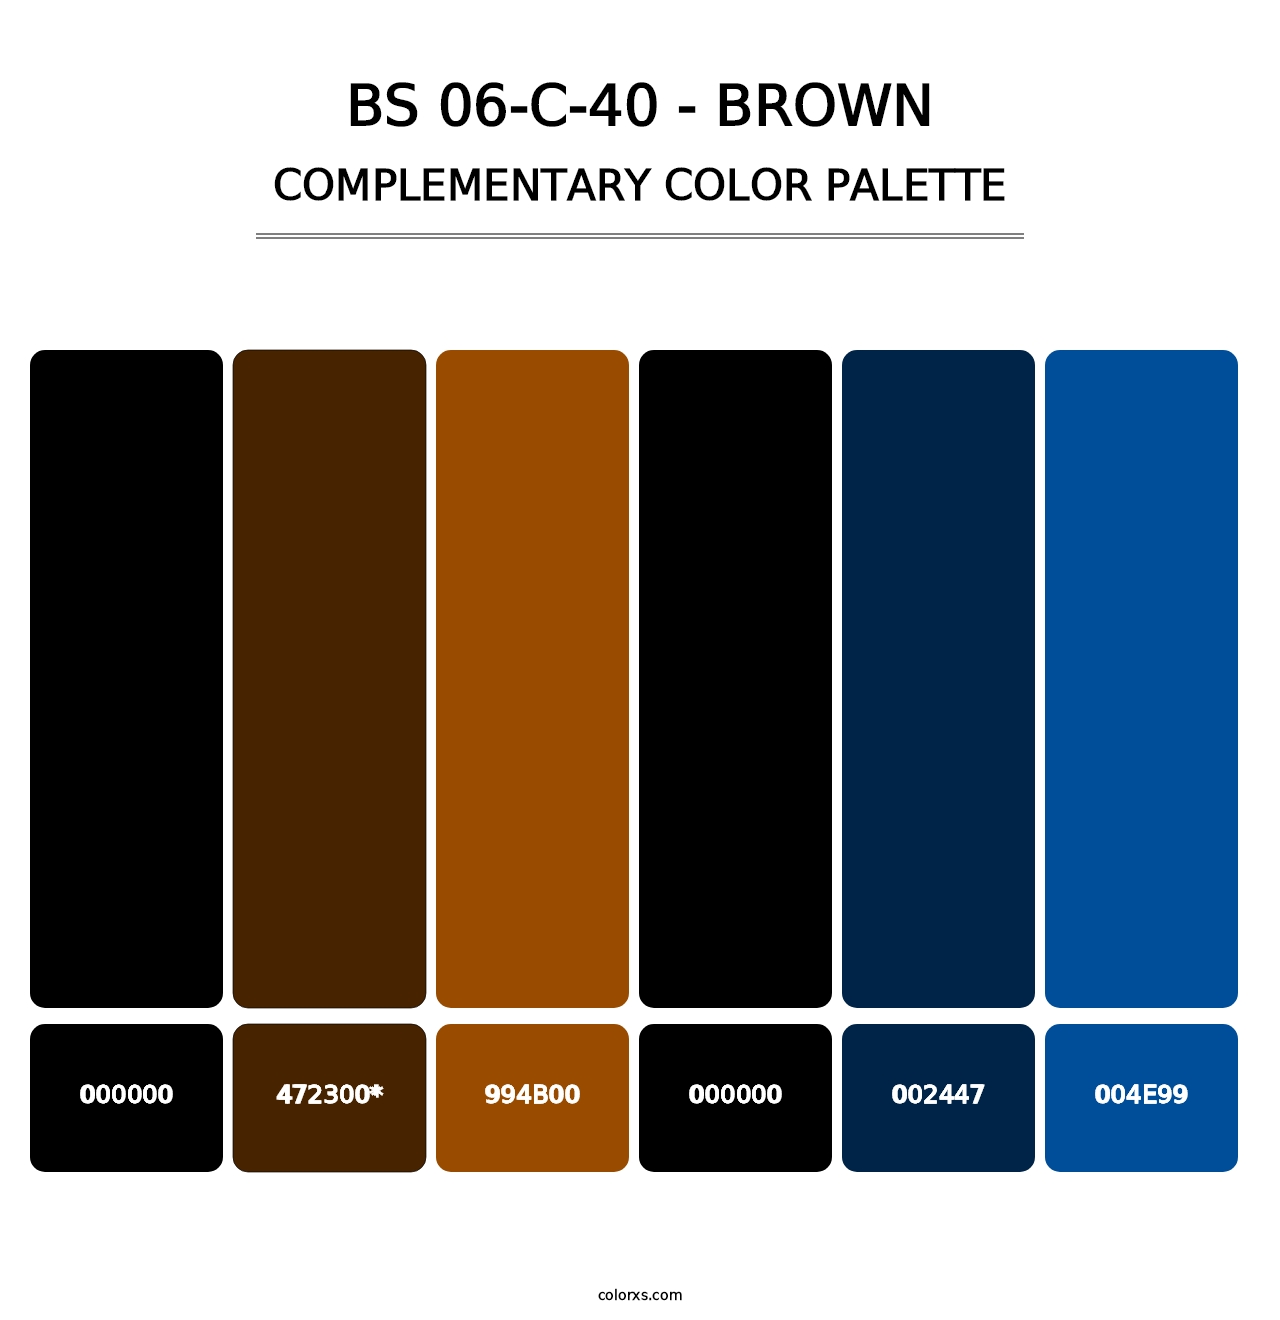 BS 06-C-40 - Brown - Complementary Color Palette